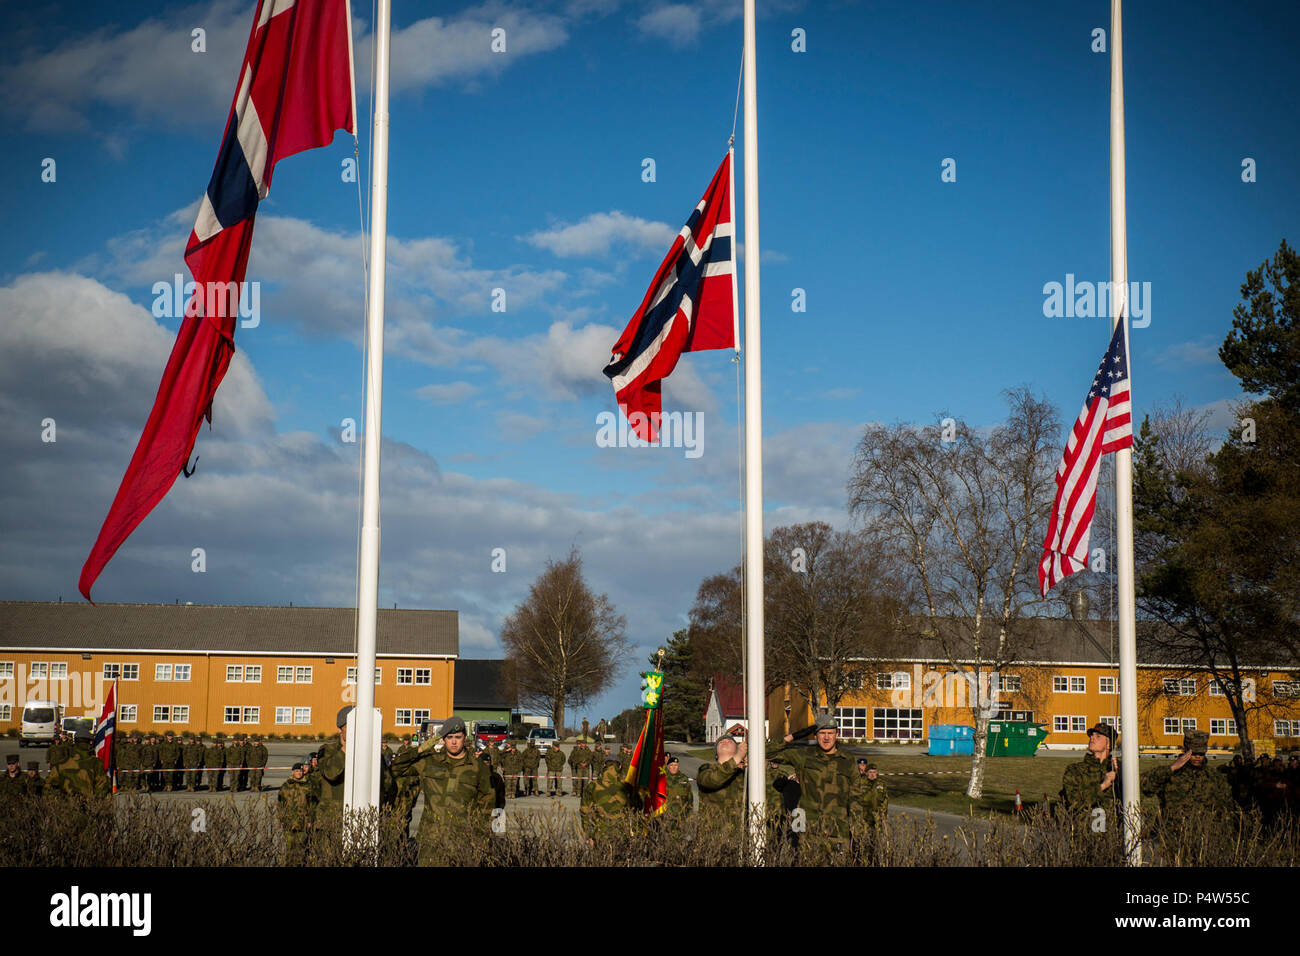 U.S. Marines and Norwegian soldiers raise the colors during a Victory in Europe Day ceremony in Stjørdal, Norway, May 8, 2017. Victory in Europe Day, known as VE Day, marks the day Nazi Germany surrendered to Allied Forces during World War II. Marine Rotational Force Europe 17.1 preserves the U.S.’s commitment to Norway and our mutual trust as we confront evolving strategic challenges together. Stock Photo